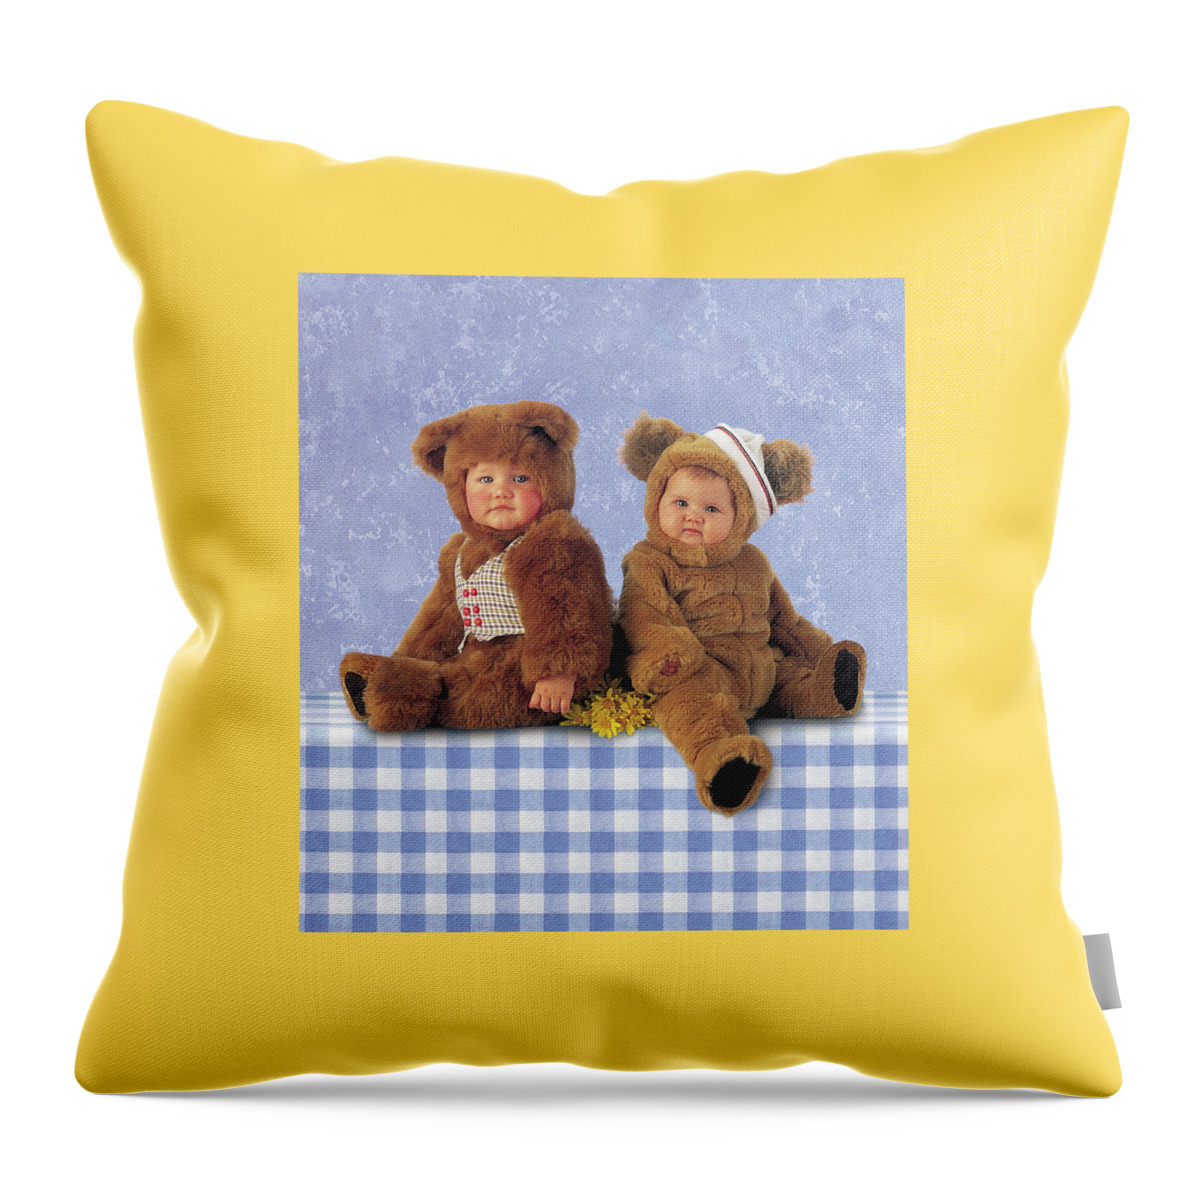  Teddy Bears Throw Pillow featuring the photograph Two Teddies by Anne Geddes